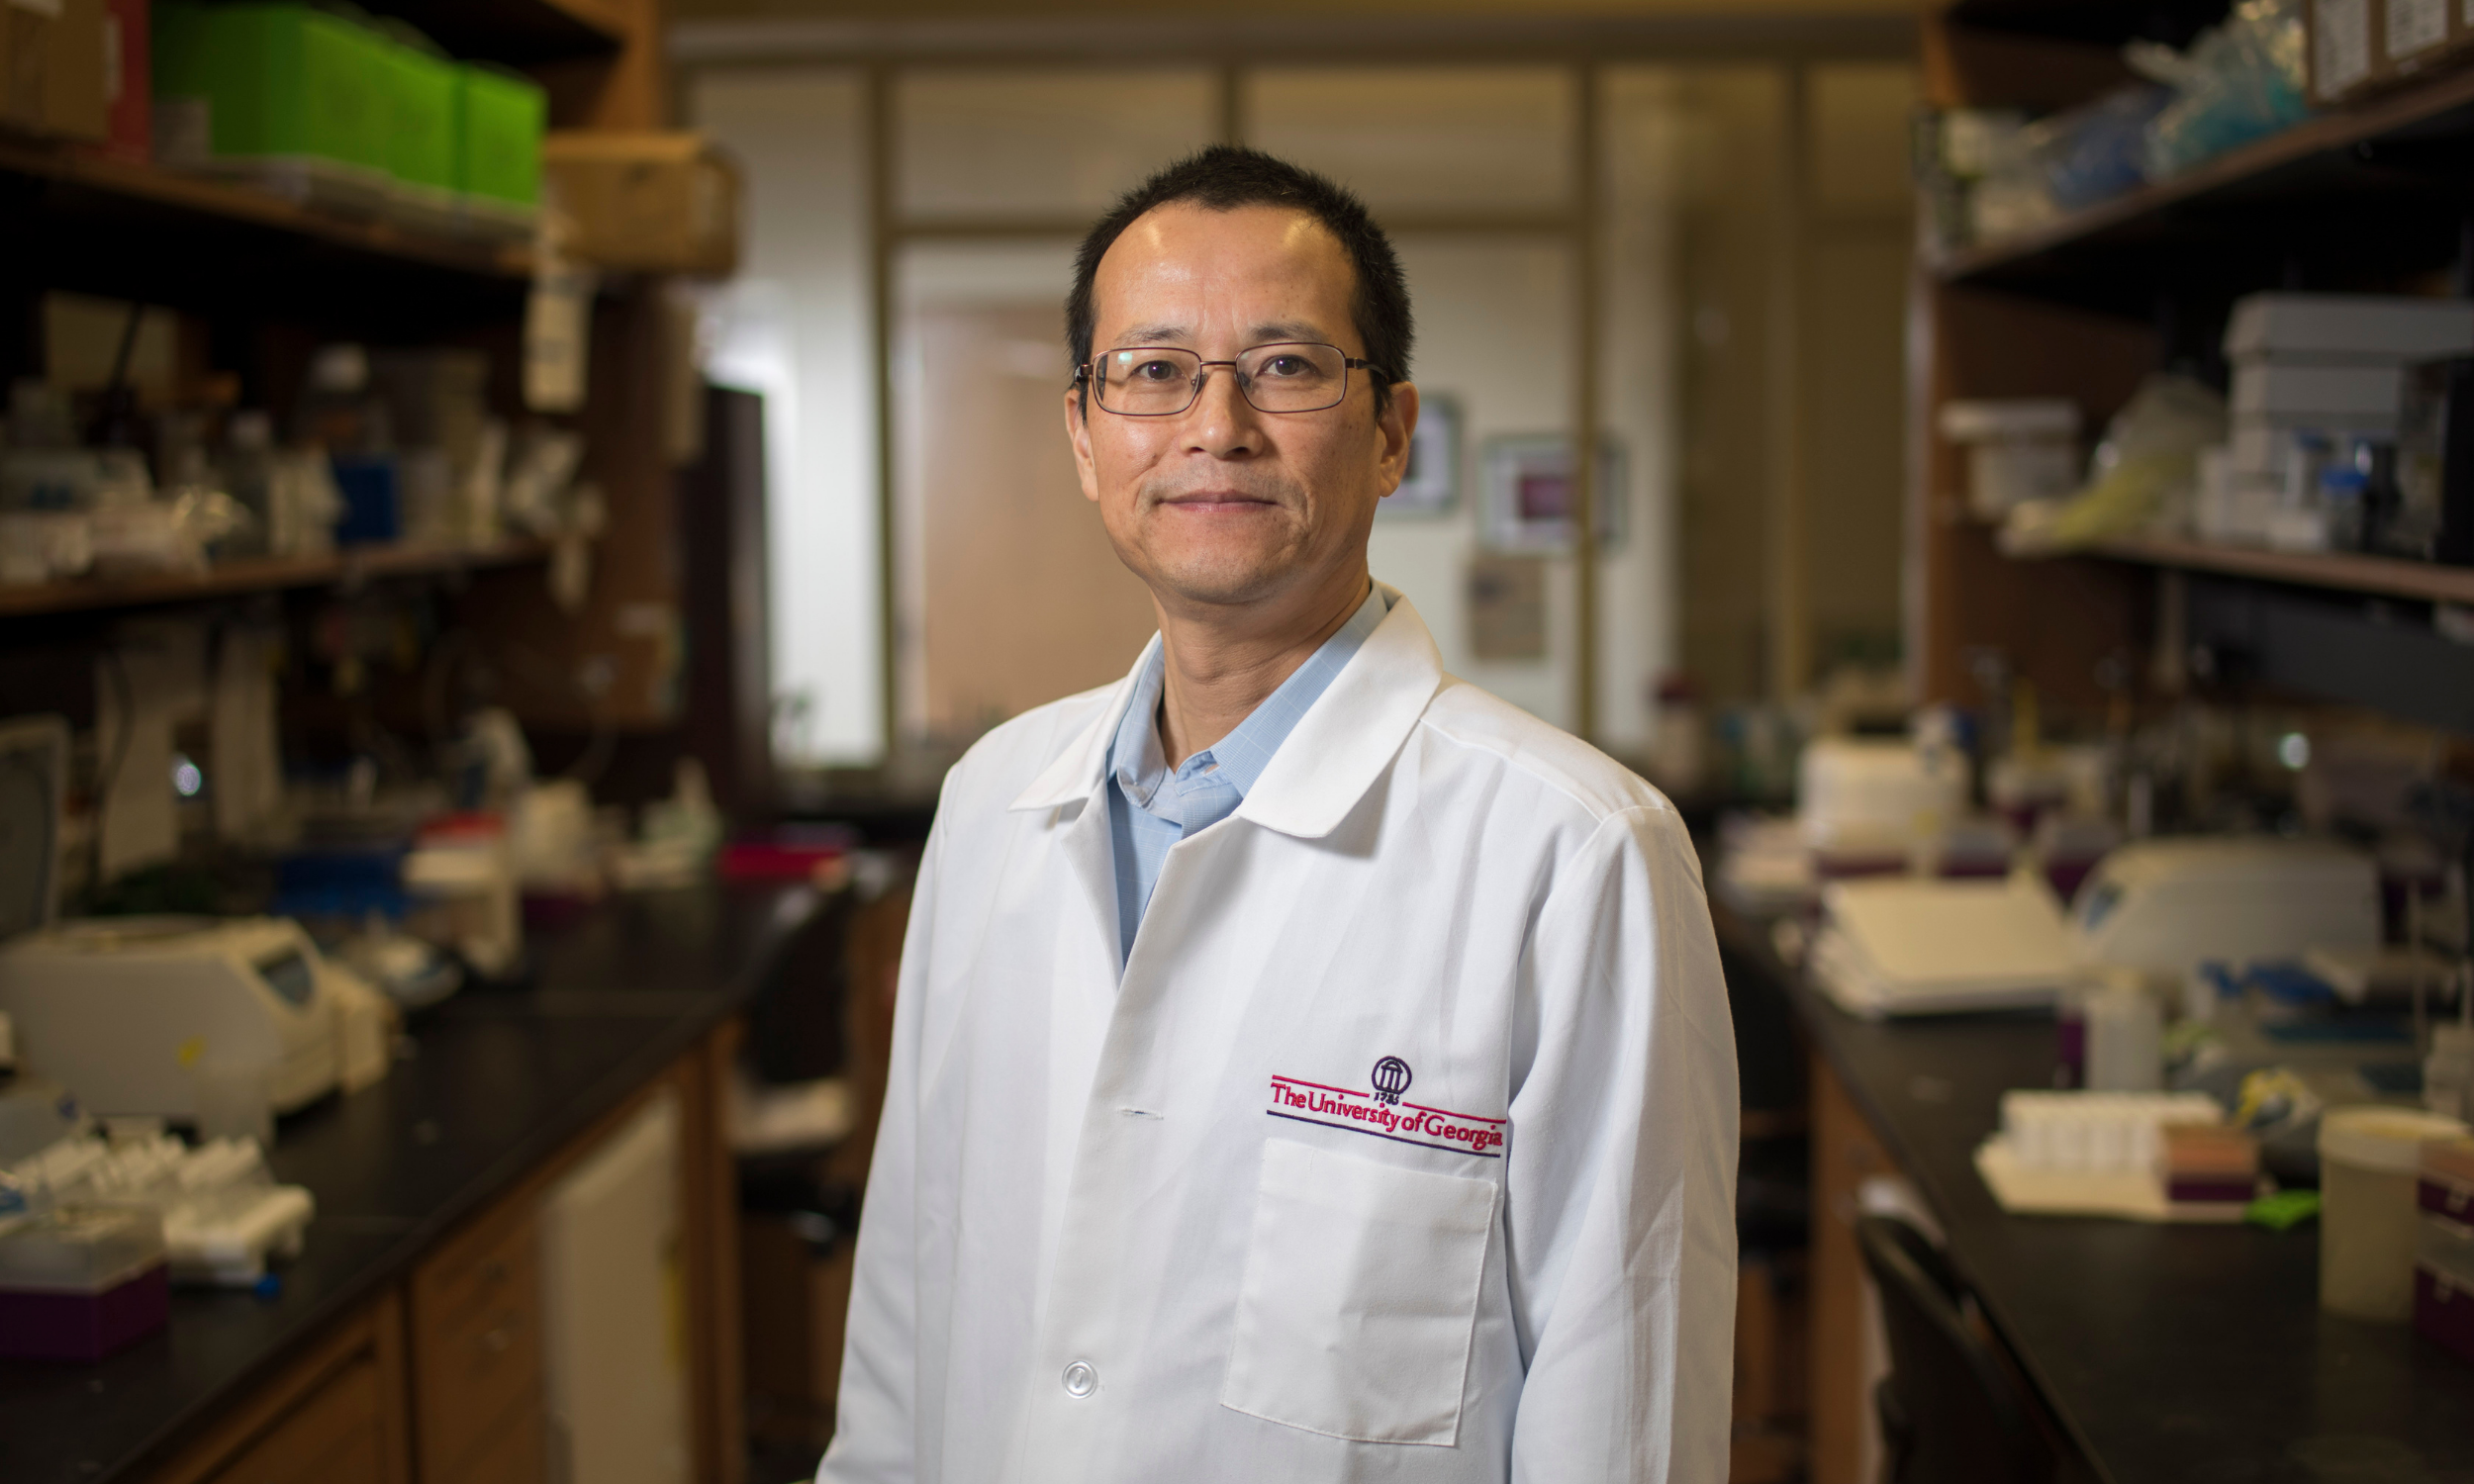 Dr. Houjian Cai Research Could Provide a Pathway for Prostate Cancer Therapeutics